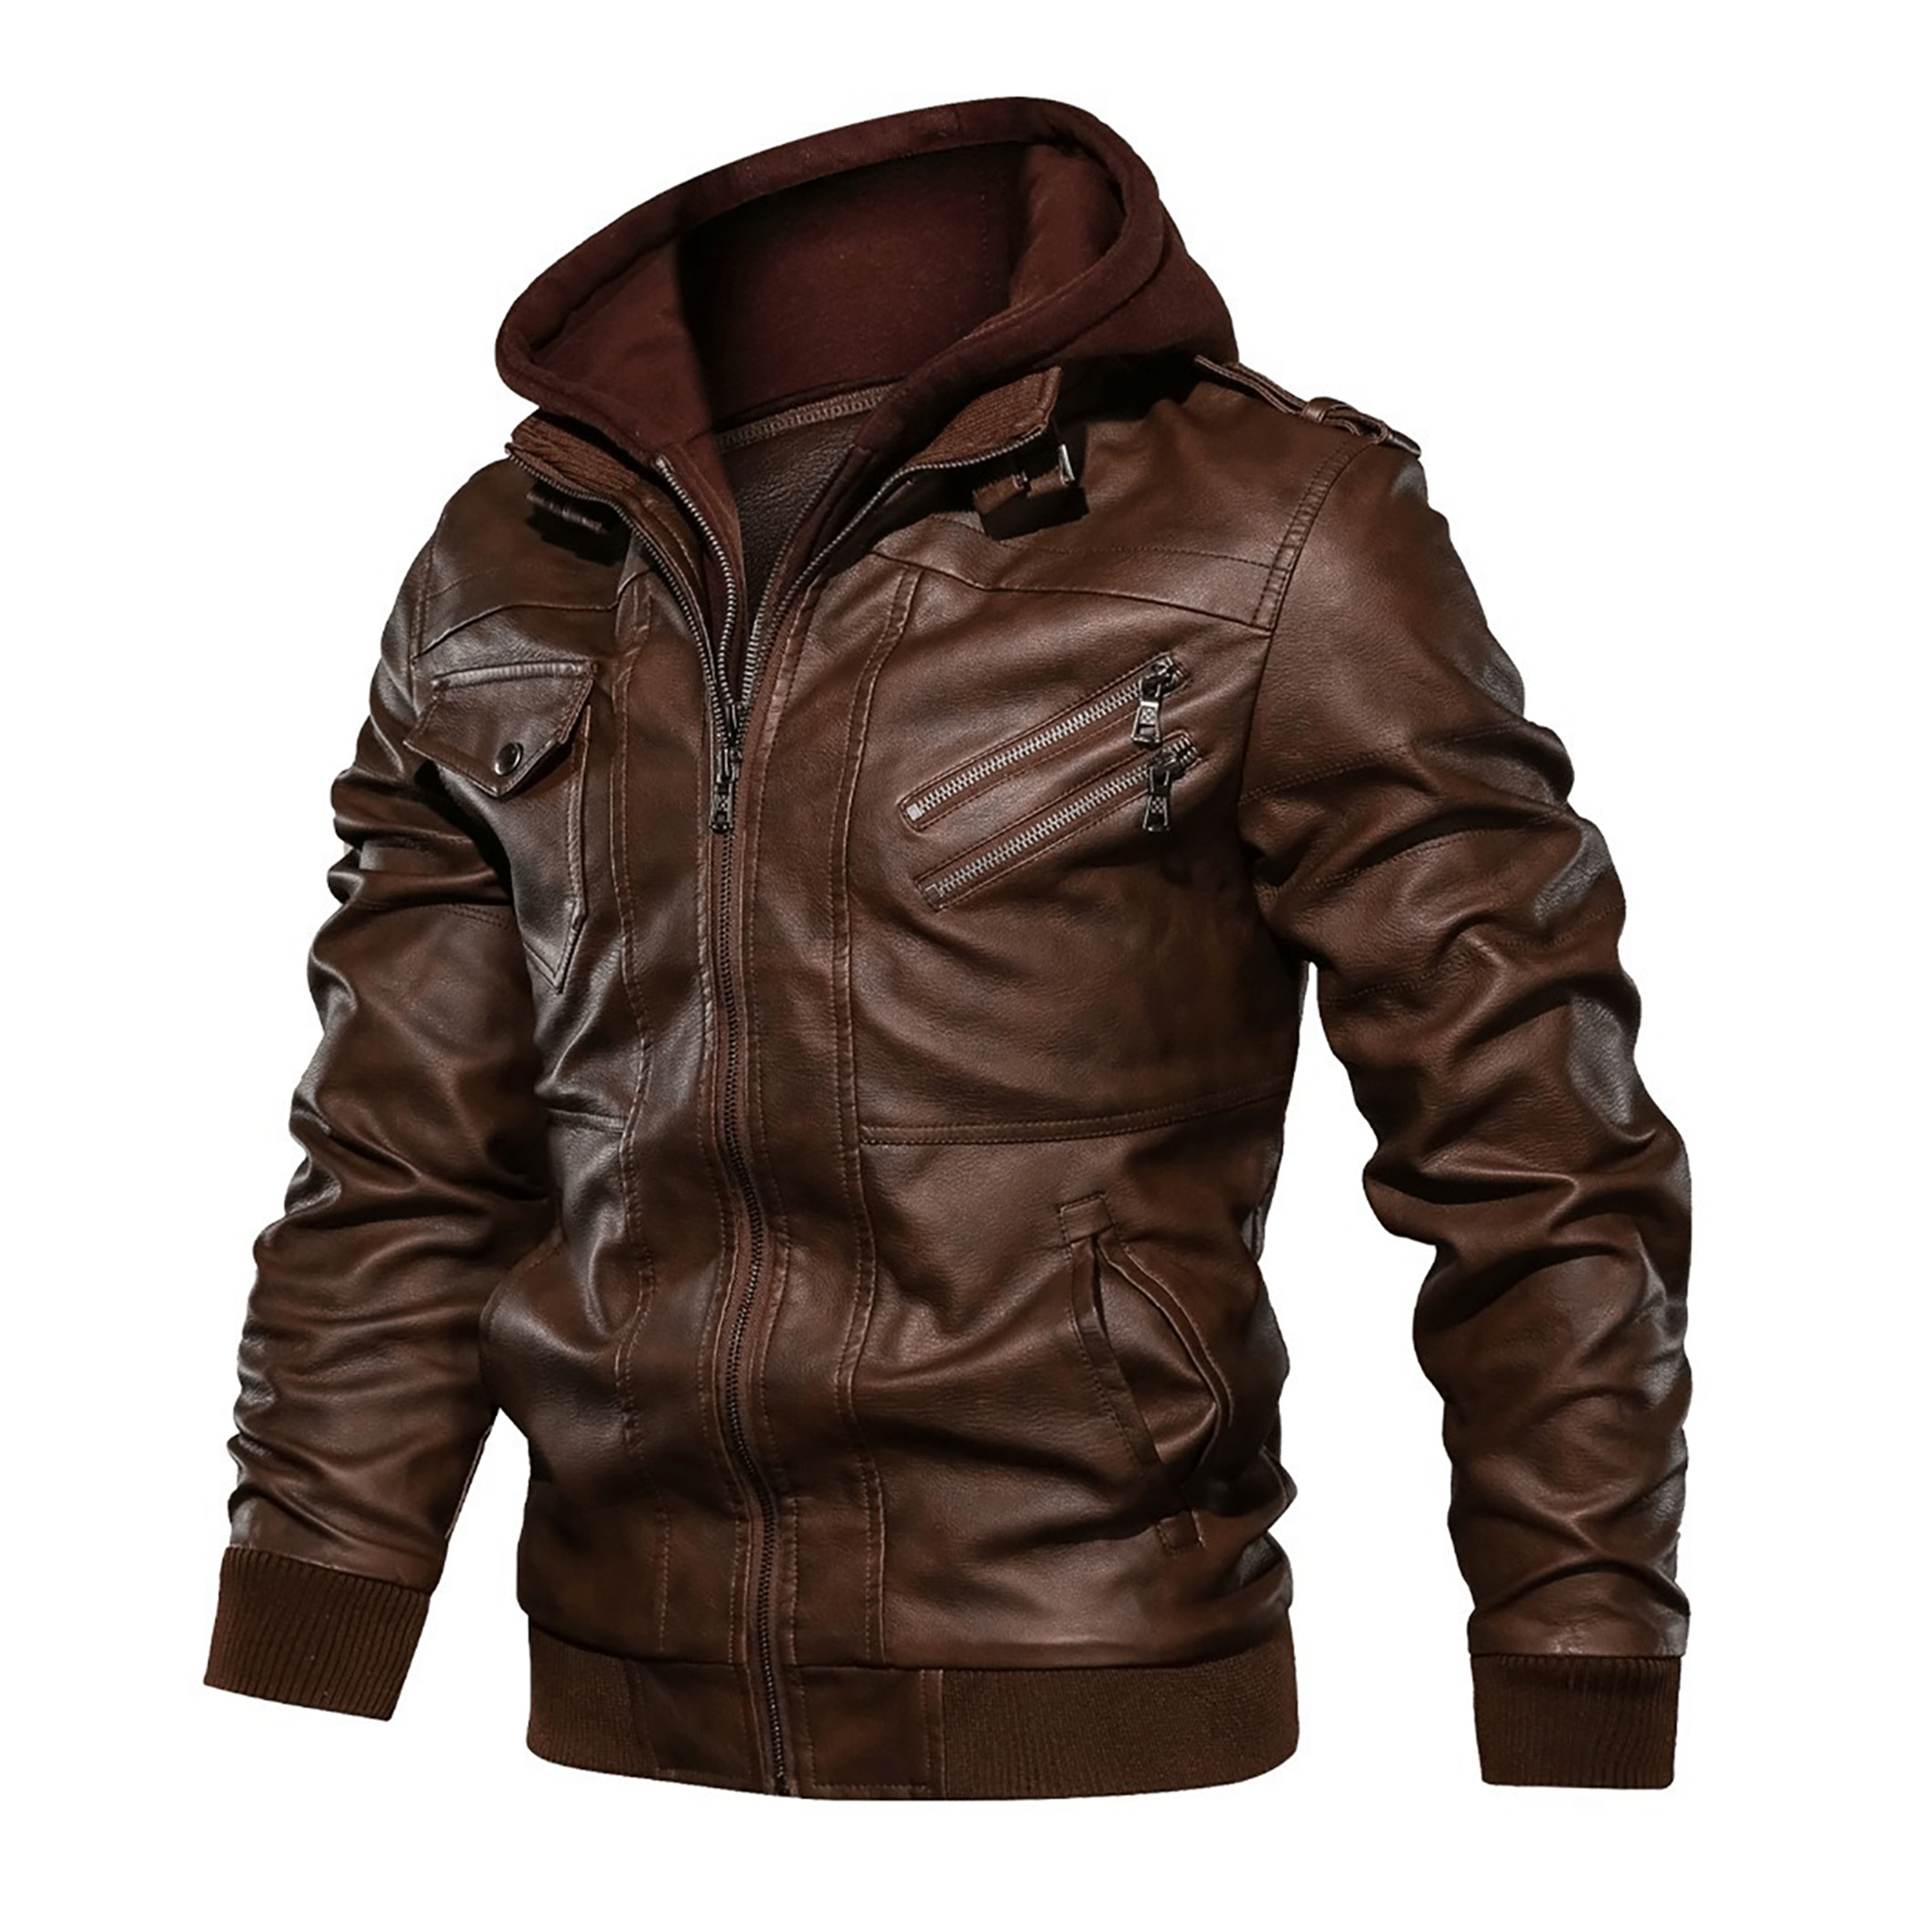 Top leather jackets and latest products 353